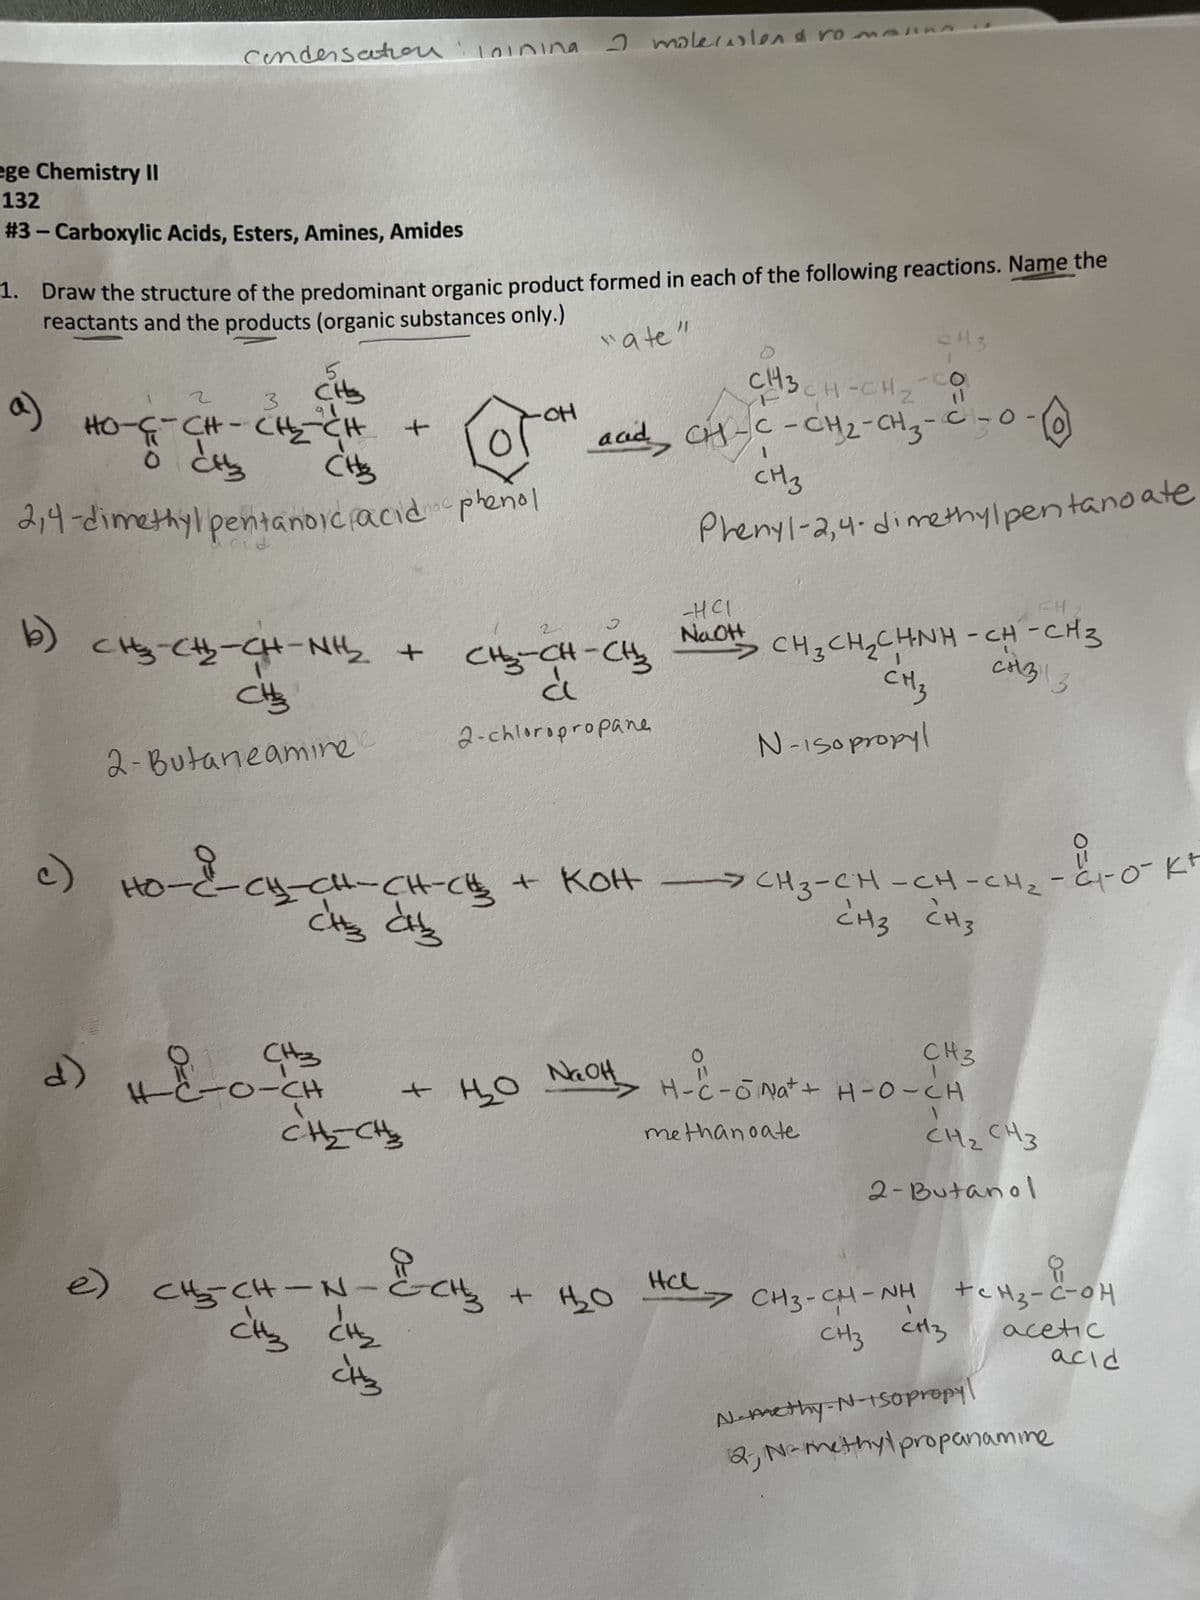 ege Chemistry II
132
#3 - Carboxylic Acids, Esters, Amines, Amides
3
"ate"
1. Draw the structure of the predominant organic product formed in each of the following reactions. Name the
reactants and the products (organic substances only.)
b)
(o
Condensation loining
2
HO-SCH-CH2CH
To diz
3
بط
e)
3
CHS
2,4-dimethylpentanoic acid phenol
5
CHS₂
HO-
CHO-CH-CHÍNH +
CHE
2-Butaneamine
d)
Lose
4) +-8-0-CH
-&-CH=CH-CH-CH₂
CH3 CH3
+
CH₂CH
m
22-5-
CH₂CH-N
I molecolend ro
Но
2
CH₂-CH-CH₂
à
2-chloropropane
+ 1₂₂0
CH3 +
C143
CH-CH₂
acid CH-C-CH₂-CH₂-C -0.
CH 3
C
одн
-на
NaOH
+ 1₂2₂0
с
Phenyl-2,4-dimethylpentanoate
+ кон - снз-ен-сн-сна-со-ка
CH3 CH3
1
NaOH₂ H-C-6 Nat +
-
CH3
H-C-ONa+ + H-O-CH
methanoate
PH
CH3CH2 CHNH-CH-CH3
CM3
CH3113
N-Isopropyl
EH
Еночно
2-Butanol
요
>CH3-CHINH tCM3-COH
CH3 CH3
acetic
N-methy-N-150propyl
12, N-methylpropanamine
acid